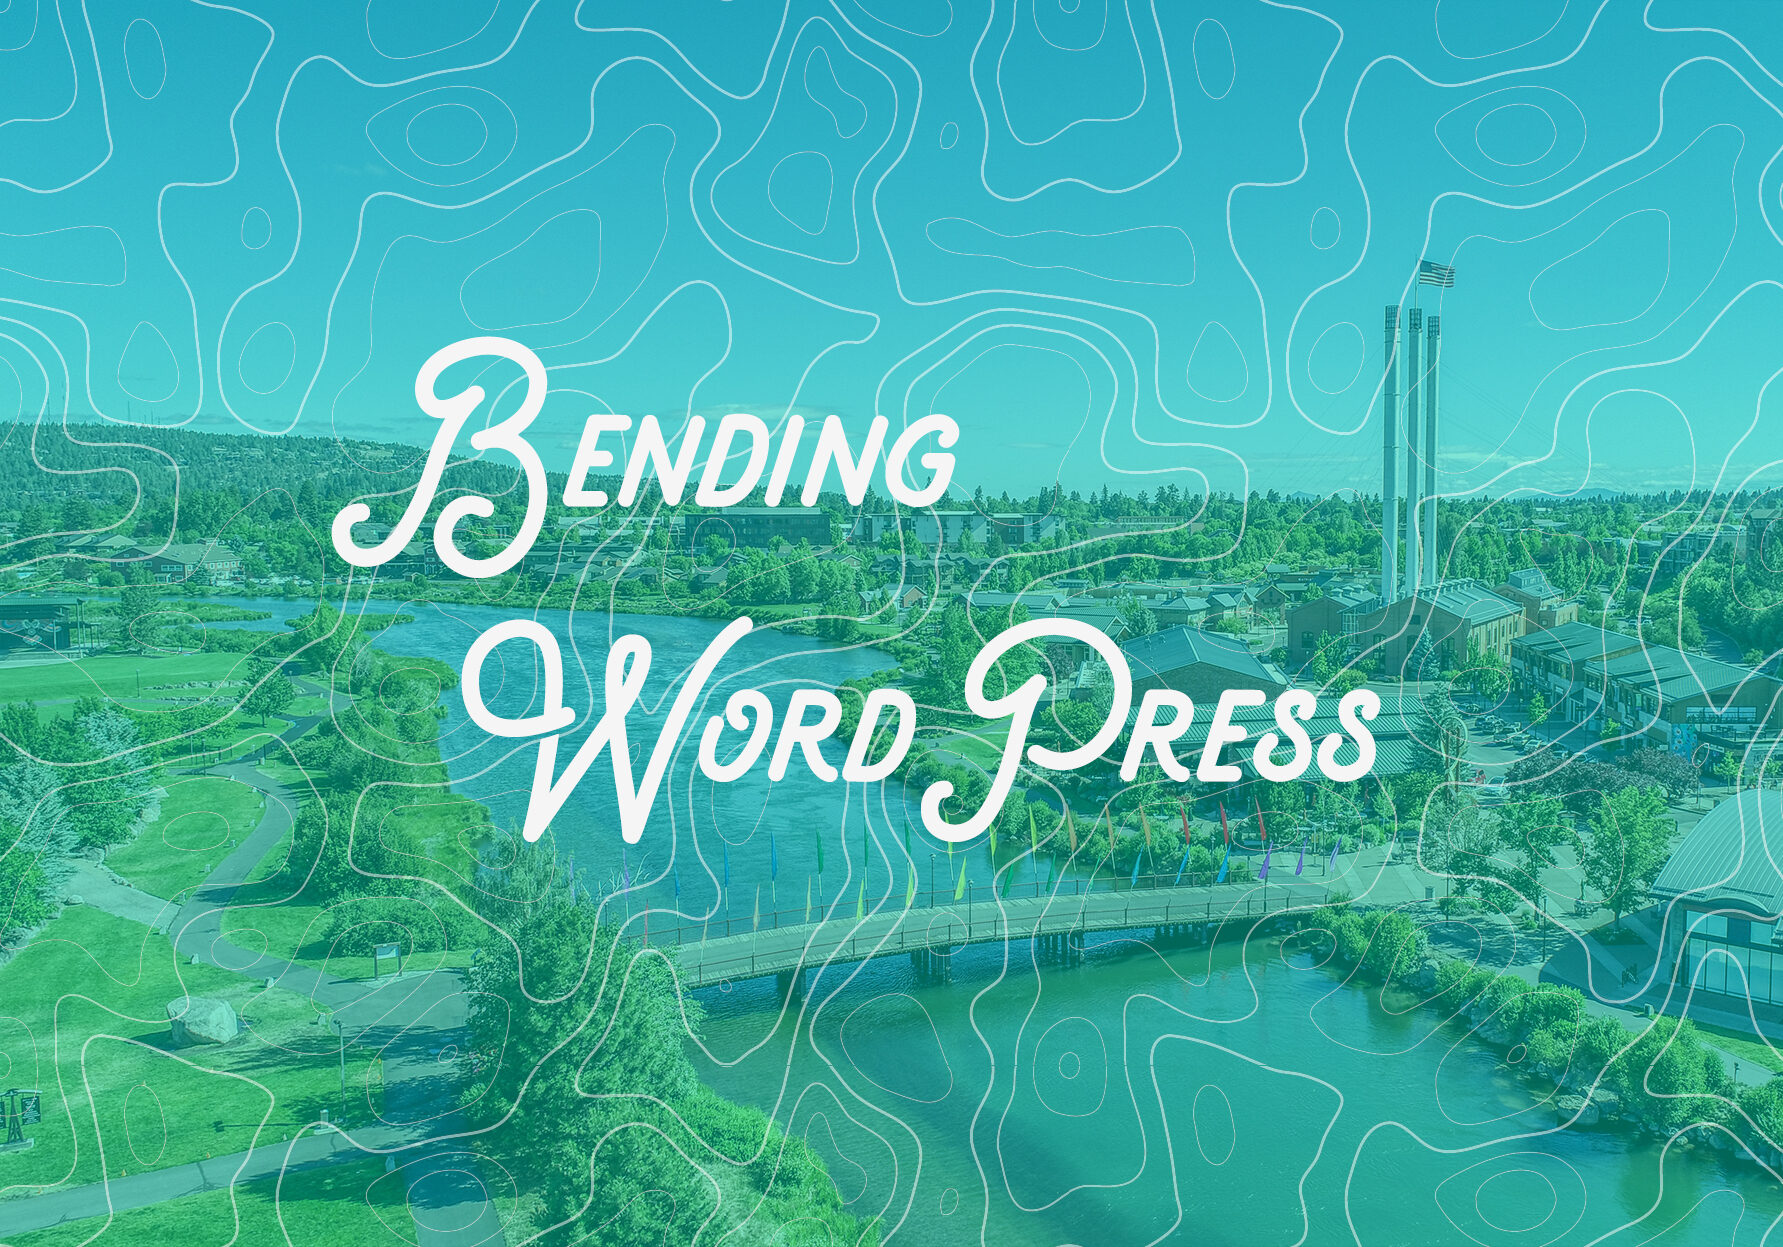 Bending WordPress Text With Bend, Oregon Overview In Background